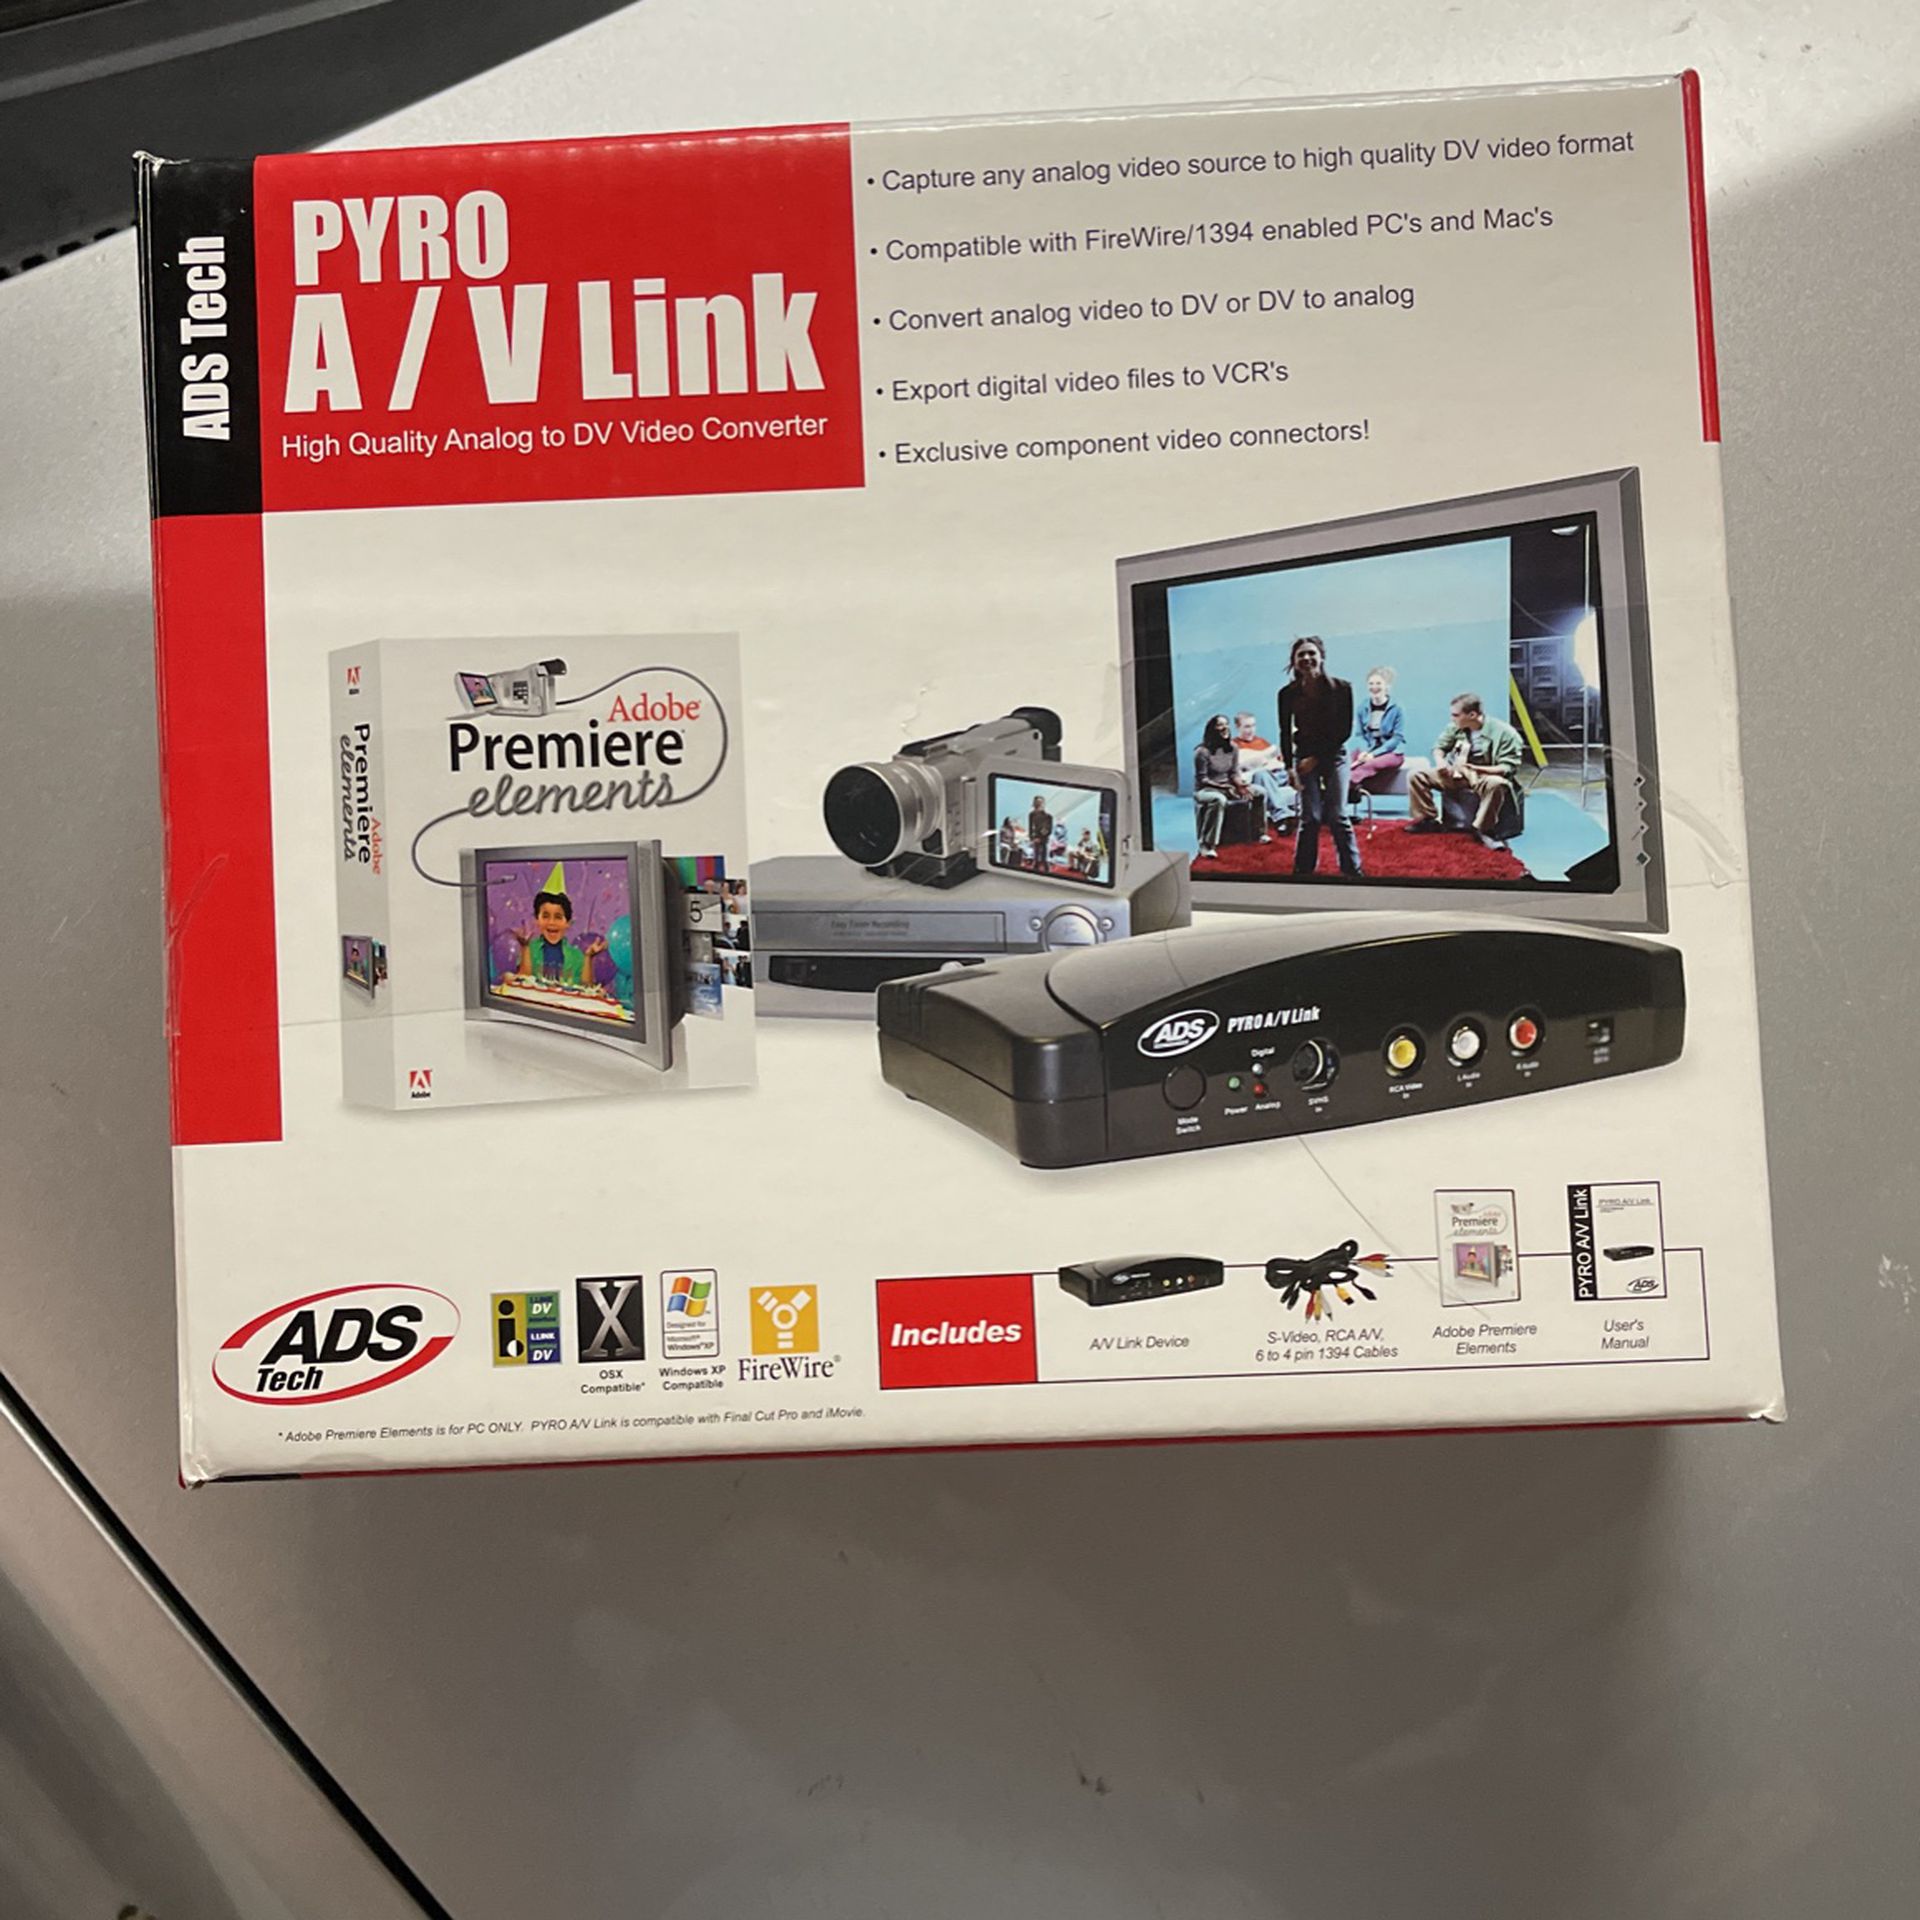 ADSTech; pyro A/V Link DV Video converter ; Save Your Memories to CD or DVD; UNOPENED/UNUSED